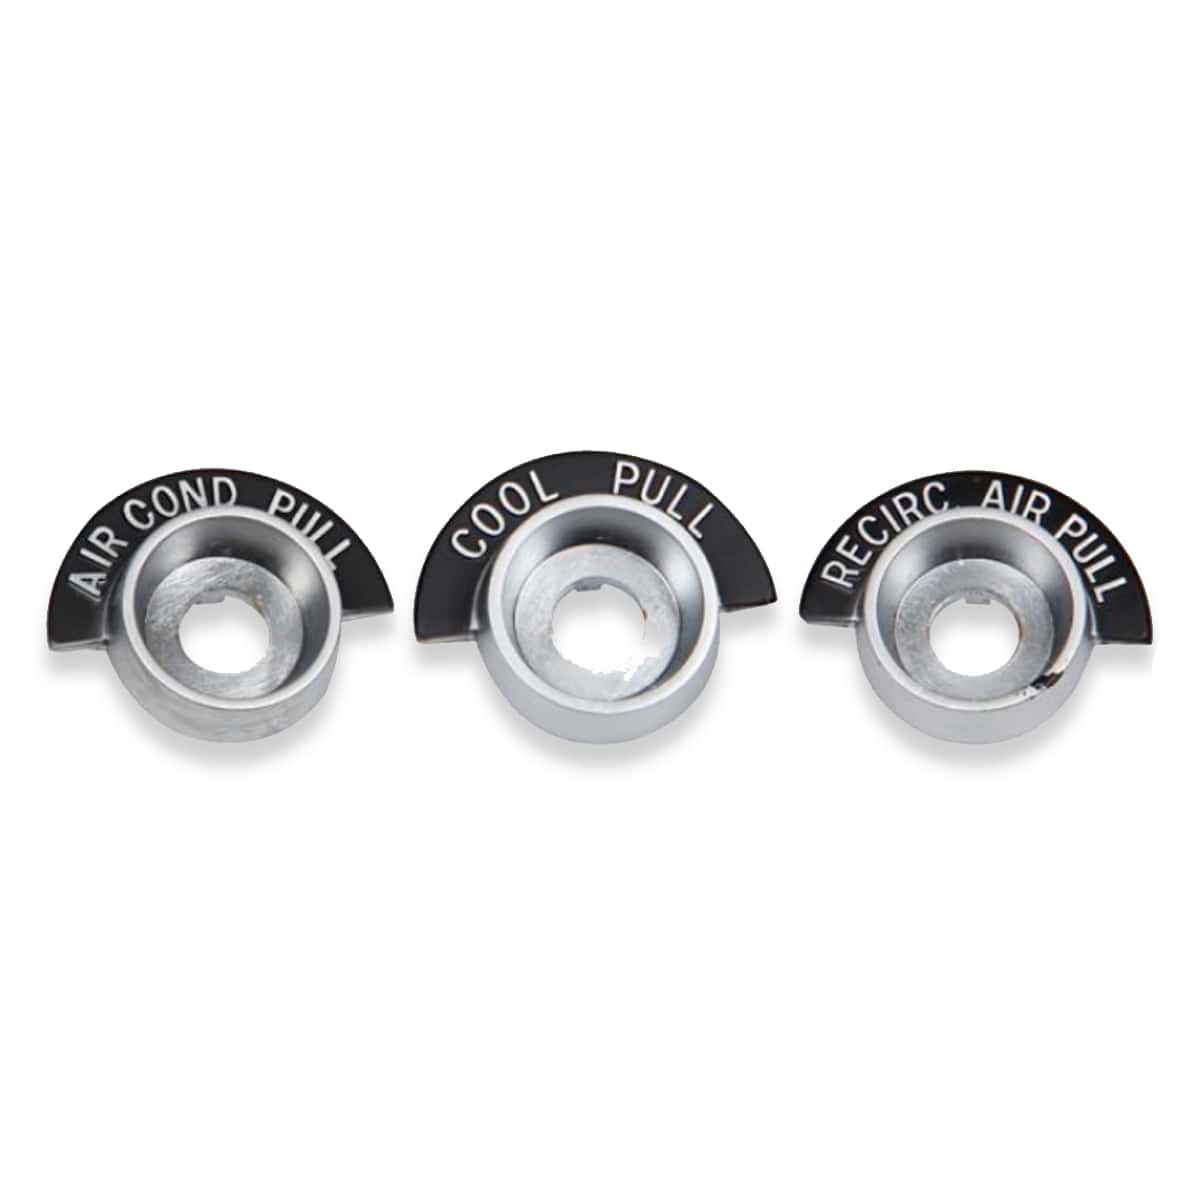 1965-1966 Air Conditioning Control Dash Bezels-Factory Air Only-Chrome Chevrolet Pickup and Big Truck